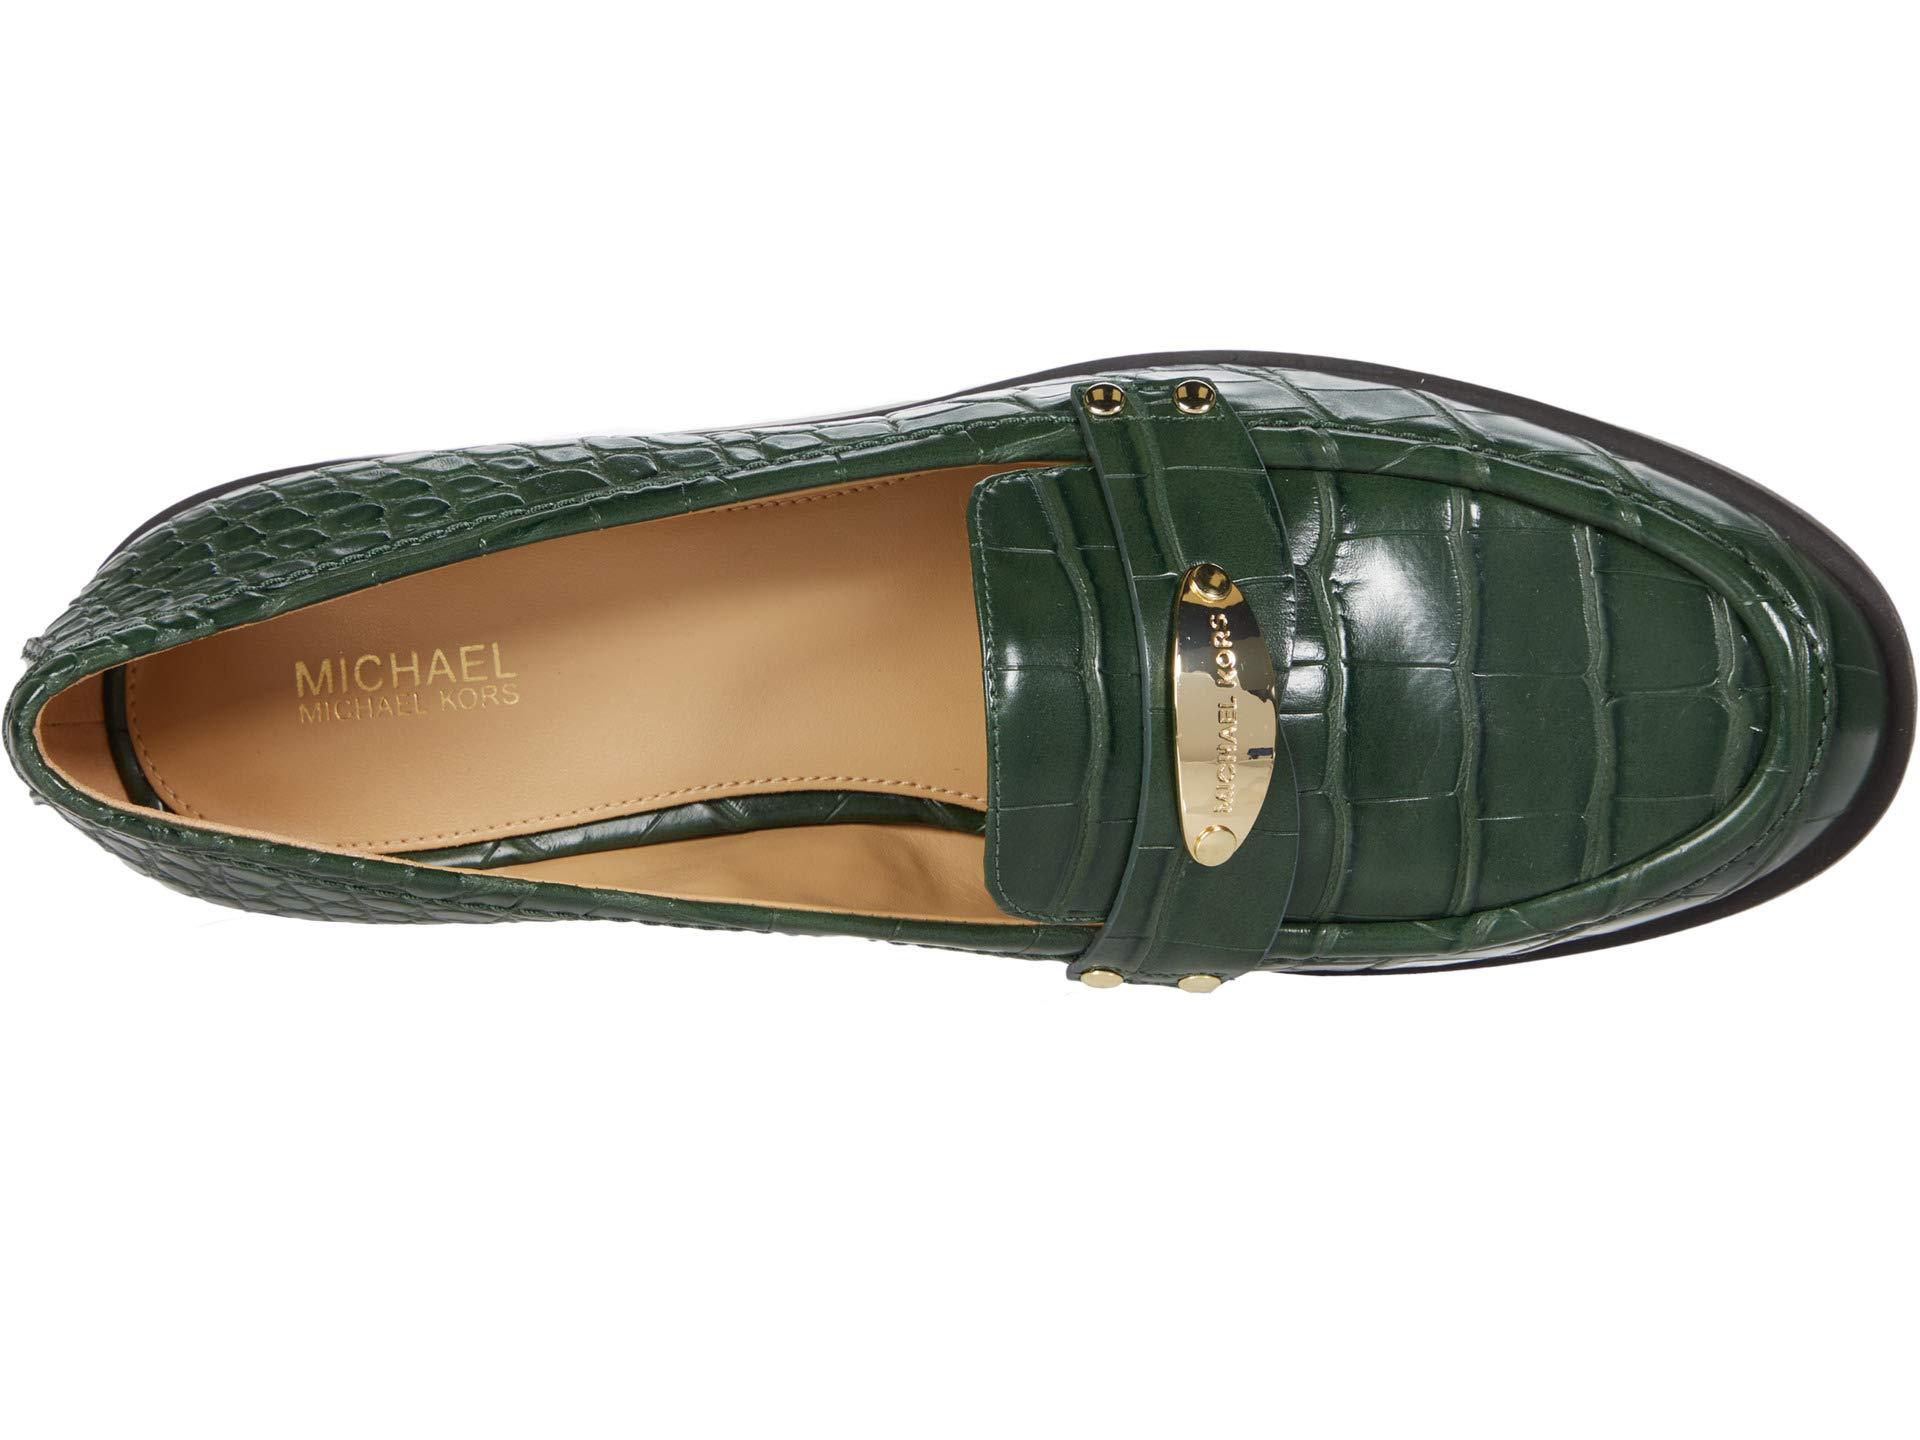 MICHAEL Michael Kors Leather Finley Loafer in Green - Lyst